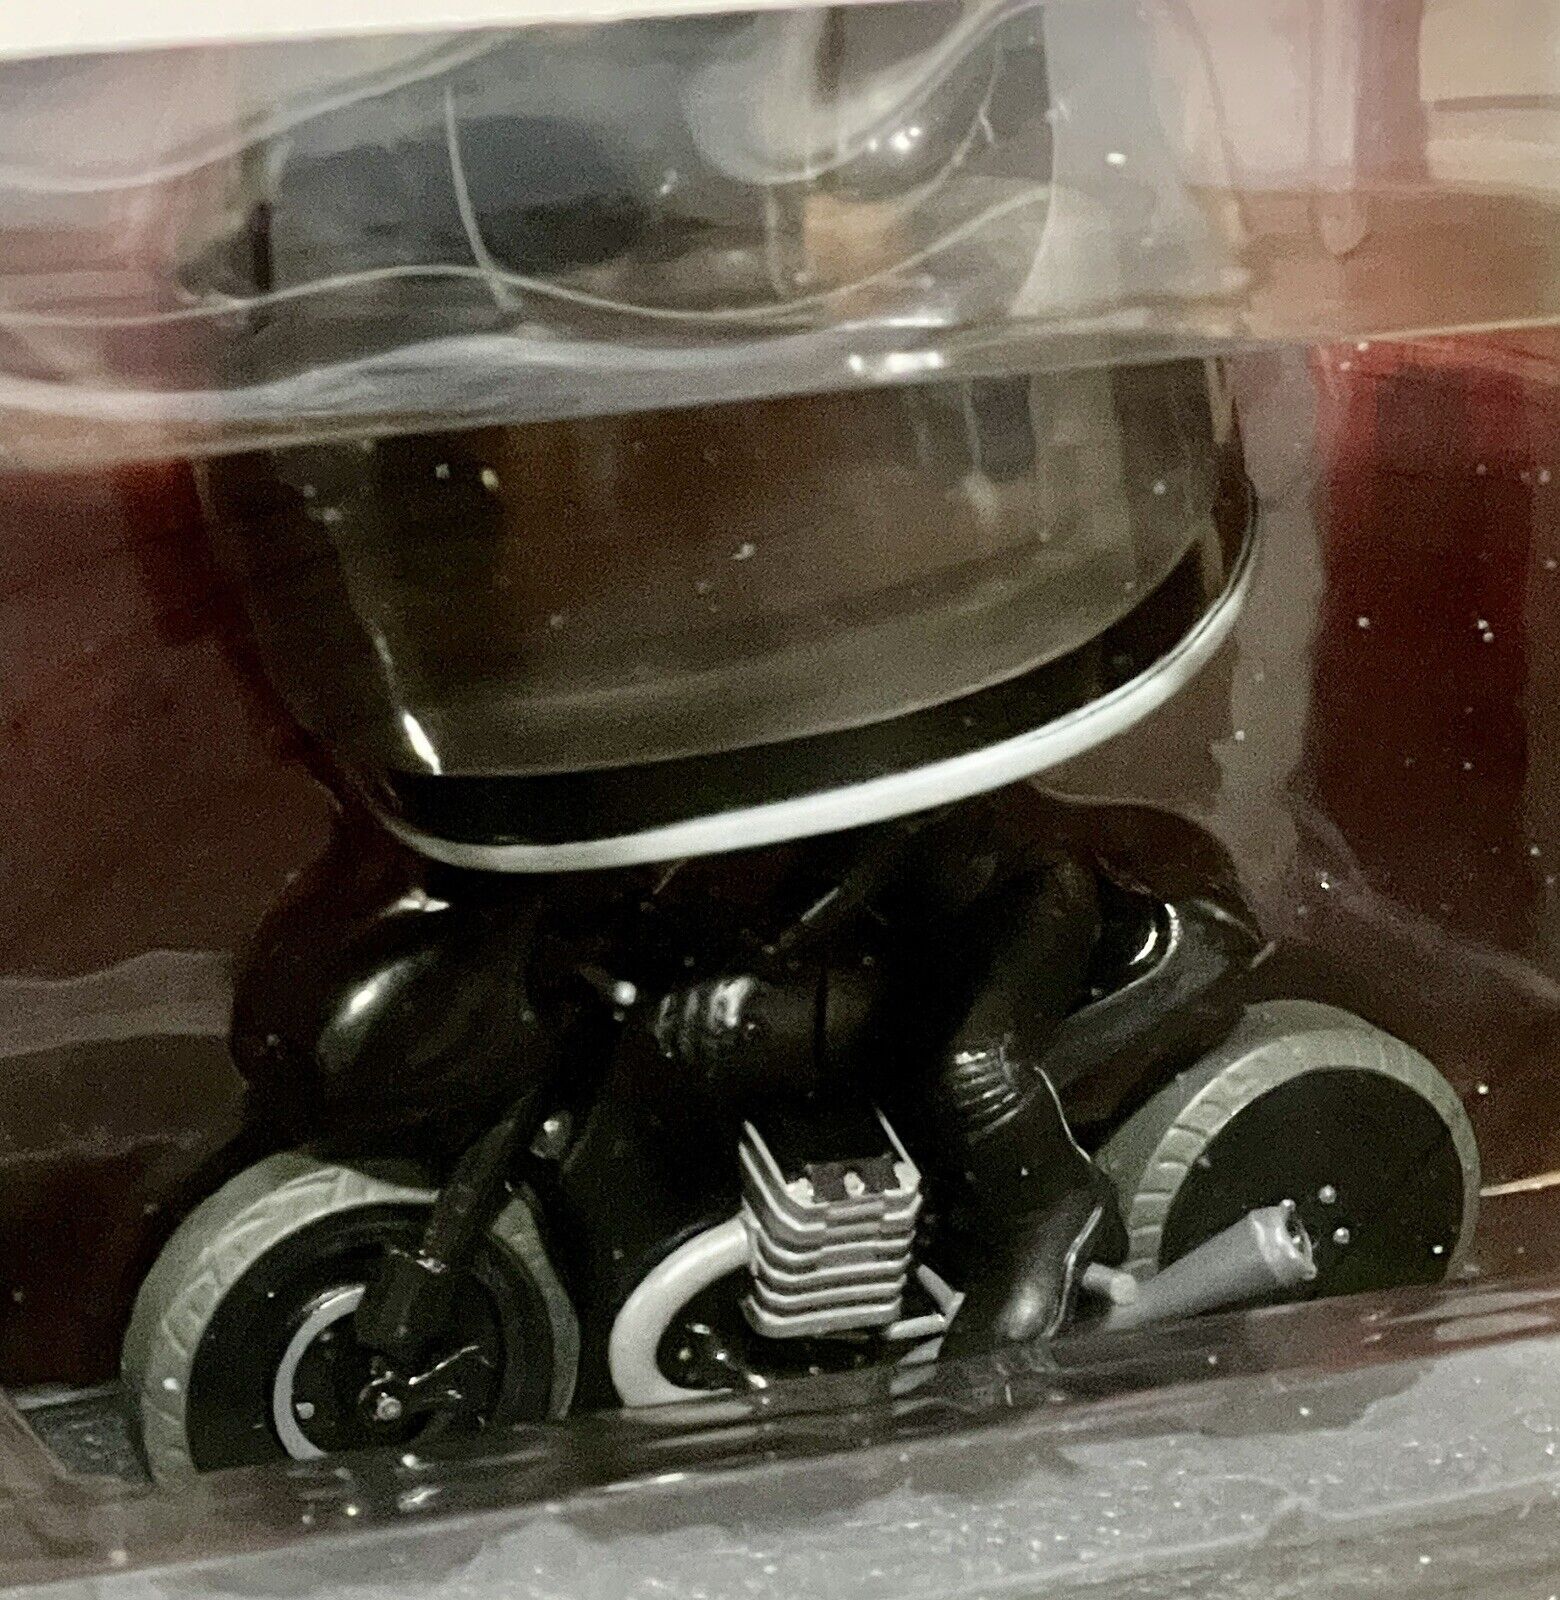 Funko Rides LG Deluxe: The Batman - Selina Kyle #281 on Motorcycle • Ships free